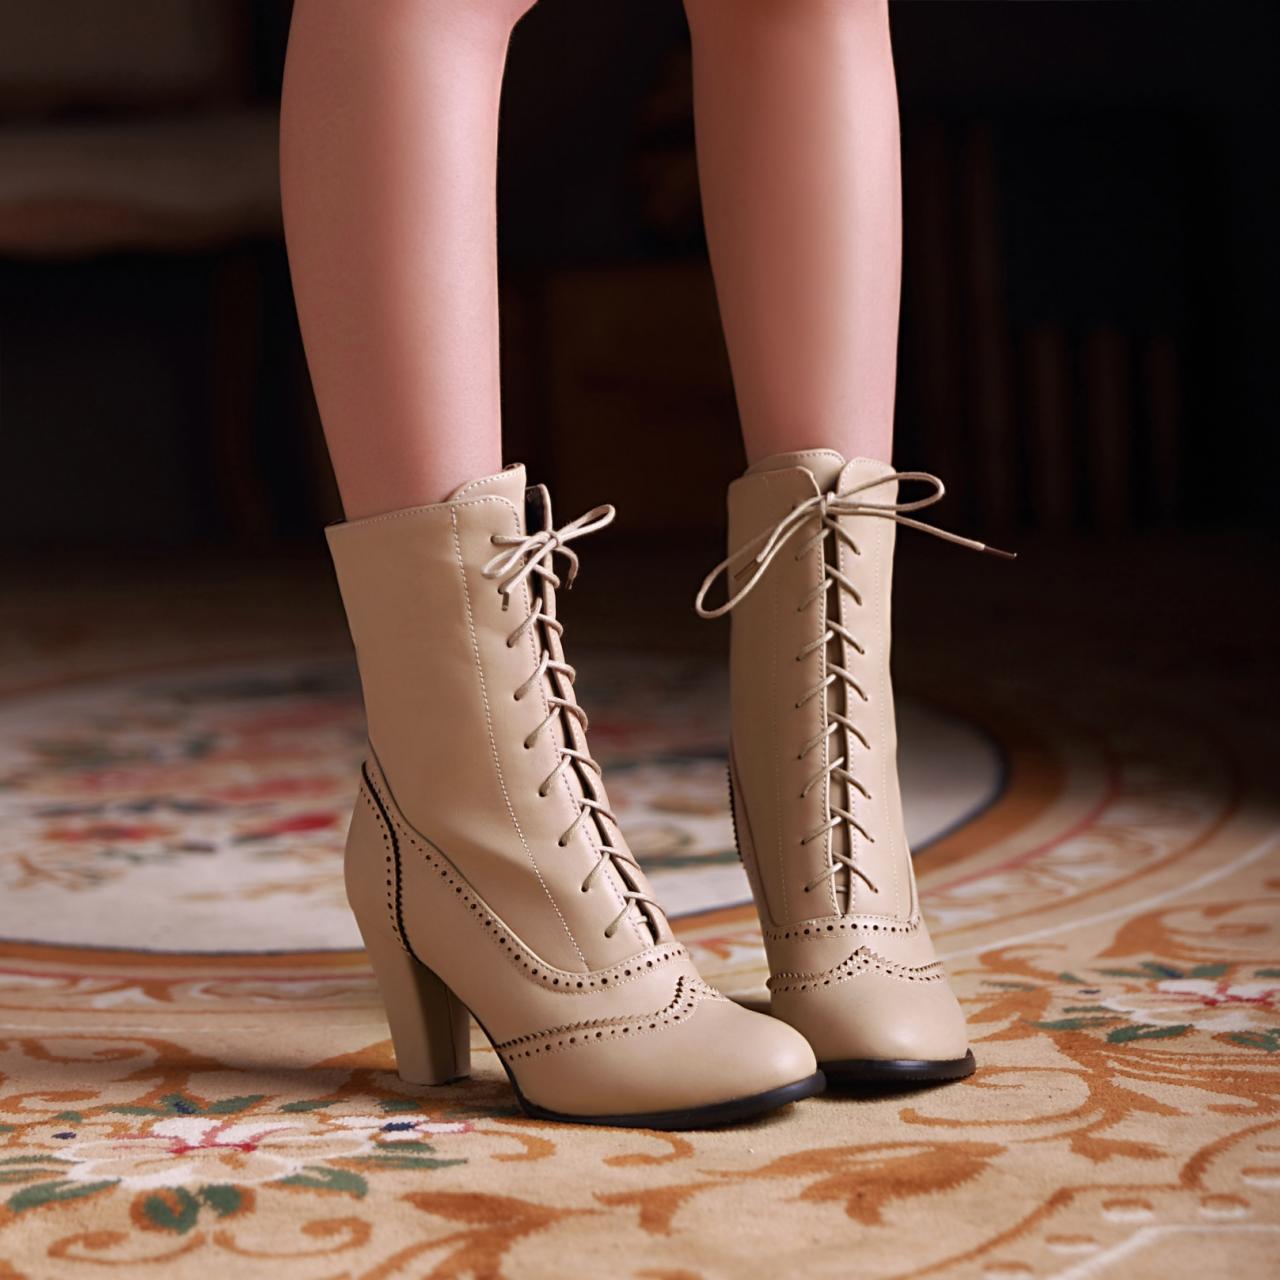 Platform Thick With Low Heel Round Toe Lace Up Mid Calf Pu Leather Retro Women Boots On Luulla